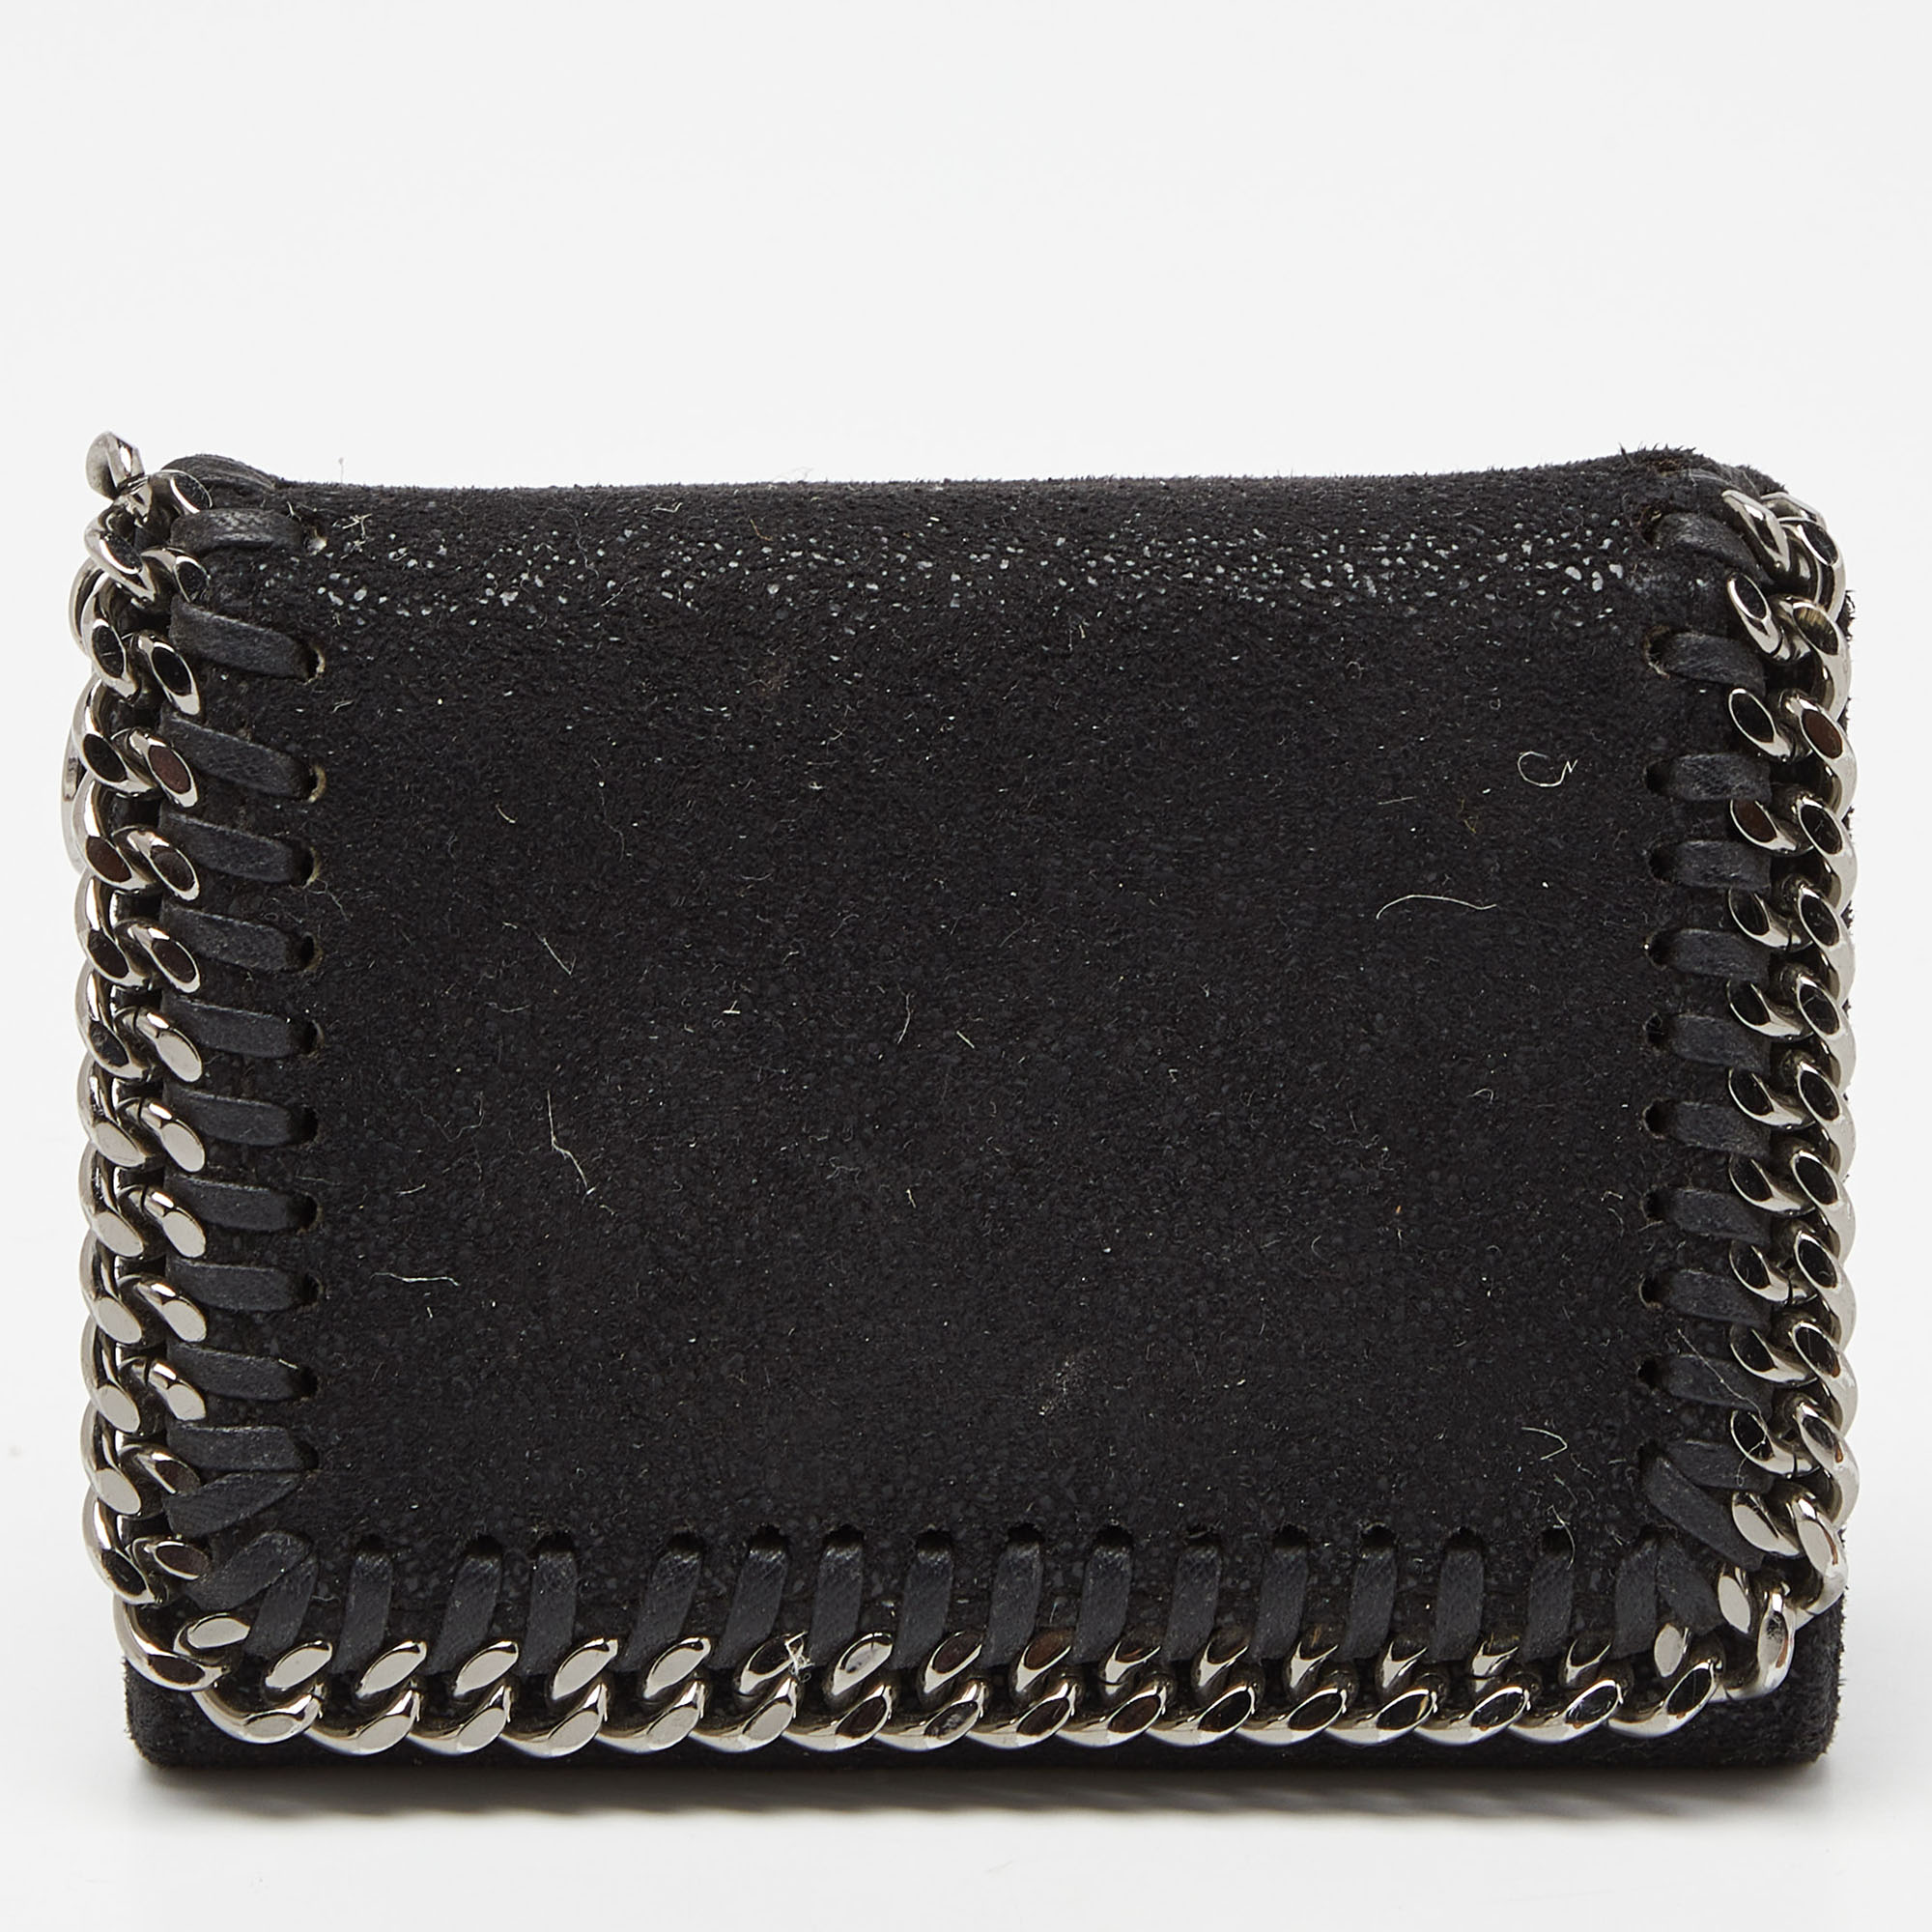 Pre-owned Stella Mccartney Black Faux Leather Falabella Trifold Wallet